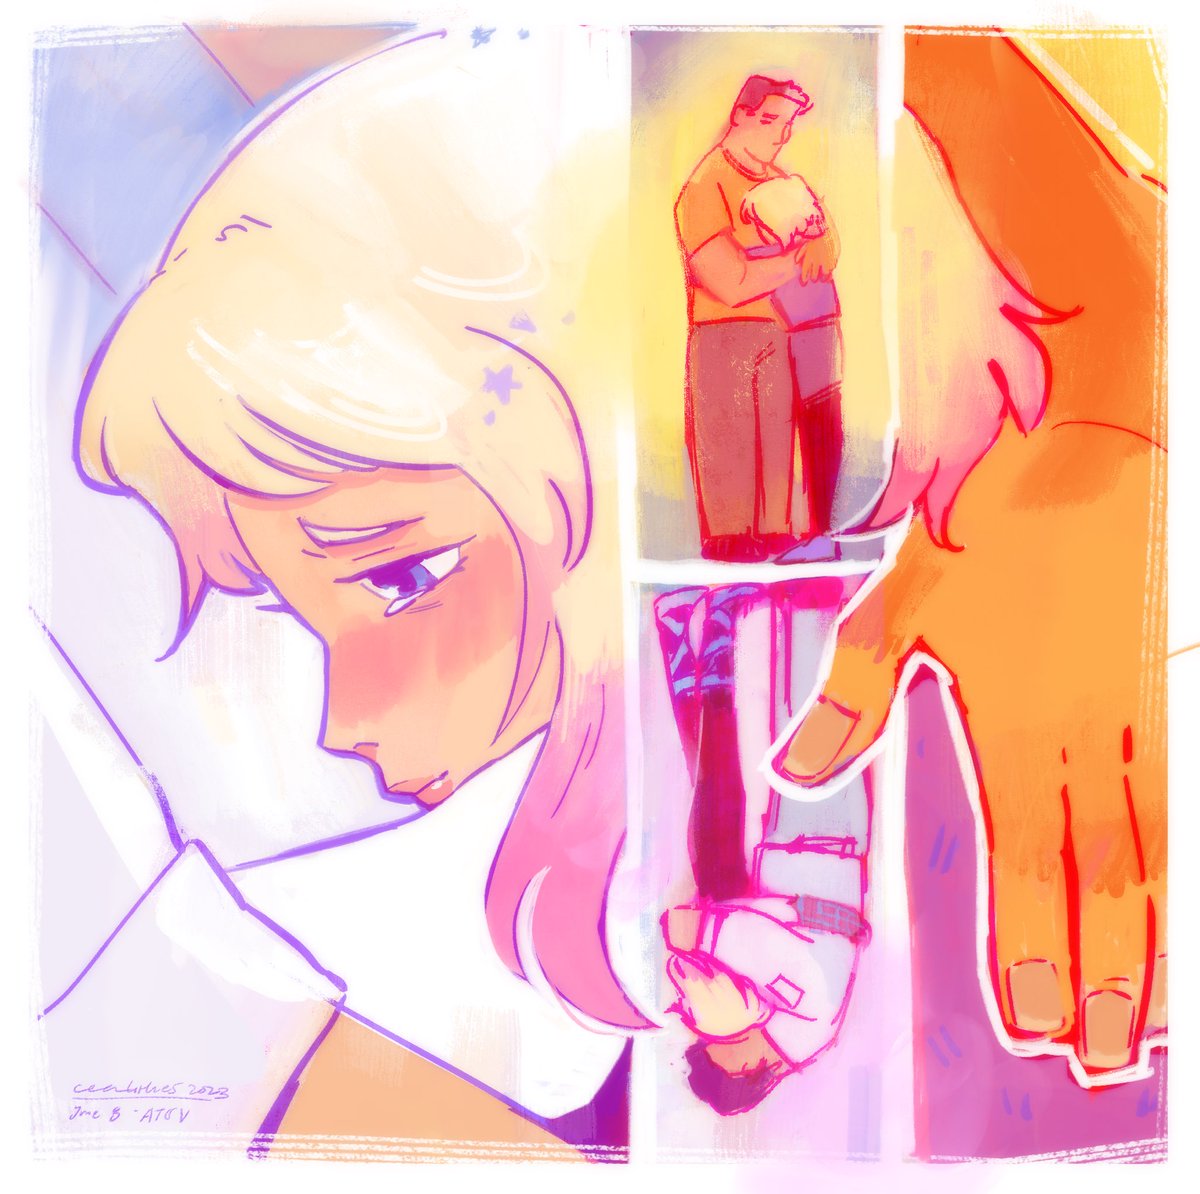 A lil doodl of two scenes that melted me thoroughly;; 

#AcrossTheSpiderVerse #AcrossTheSpiderVerseSpoilers #GwenStacy